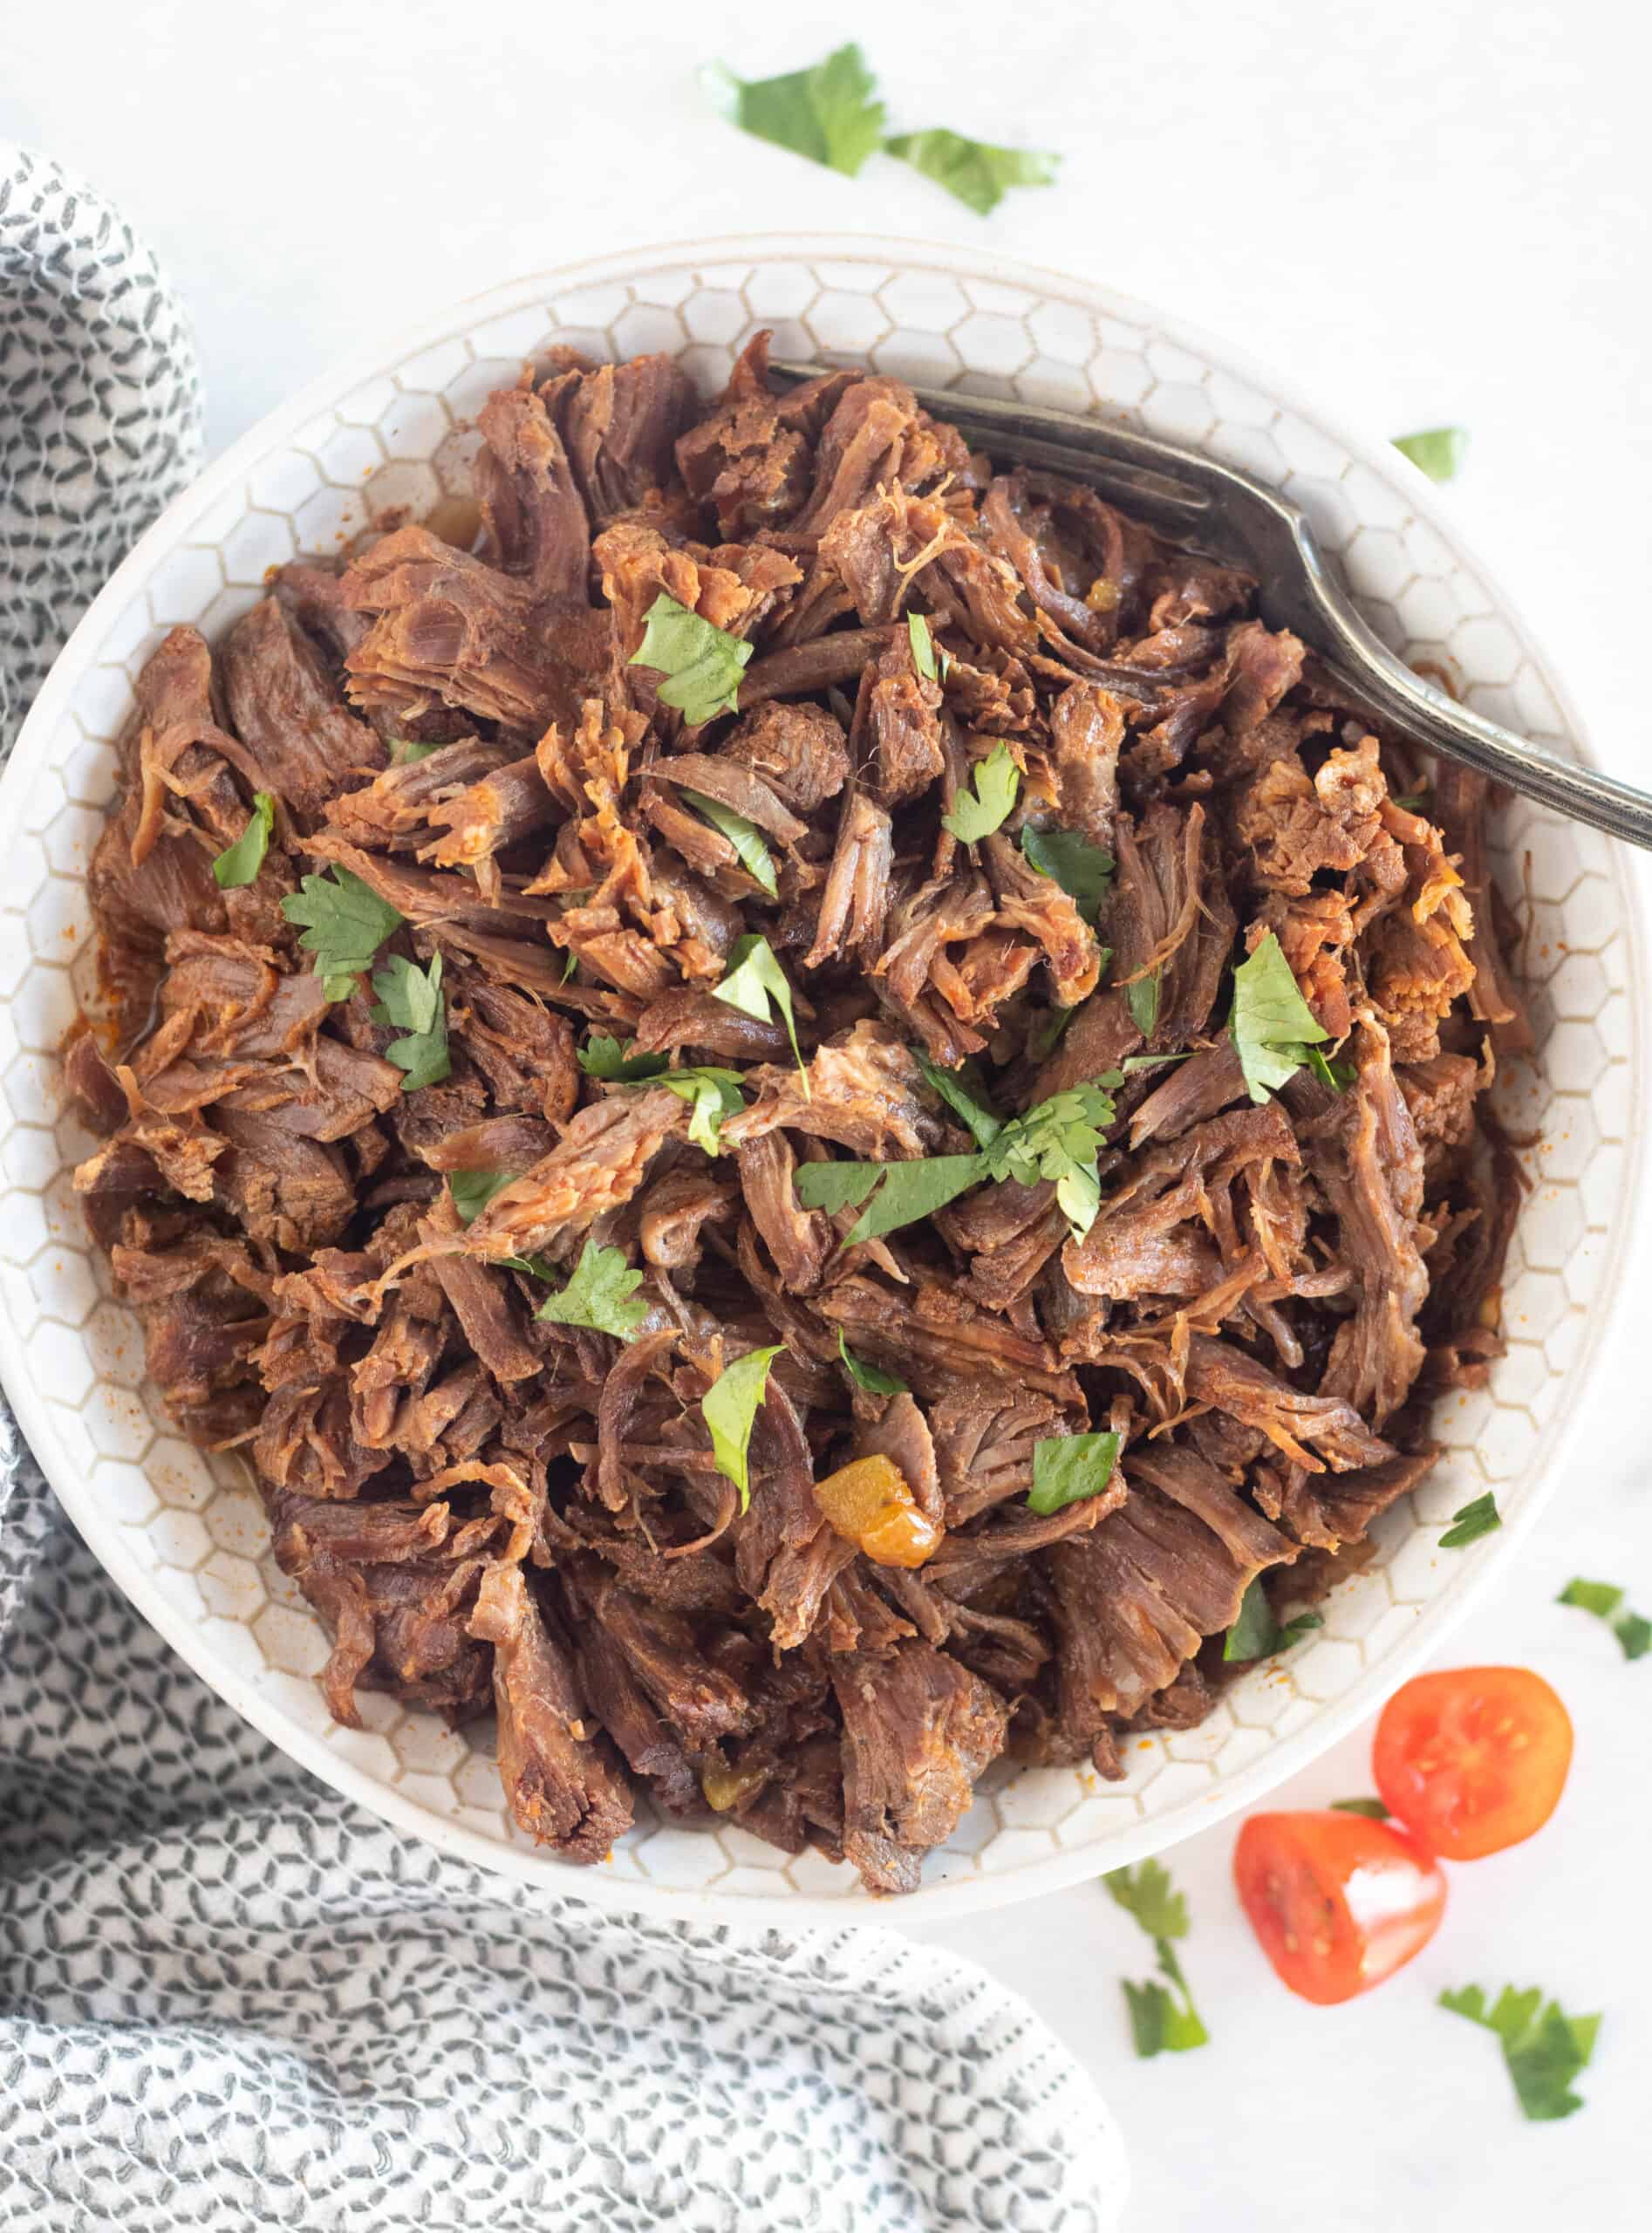 shredded beef in a bowl with a fork and garnishes.